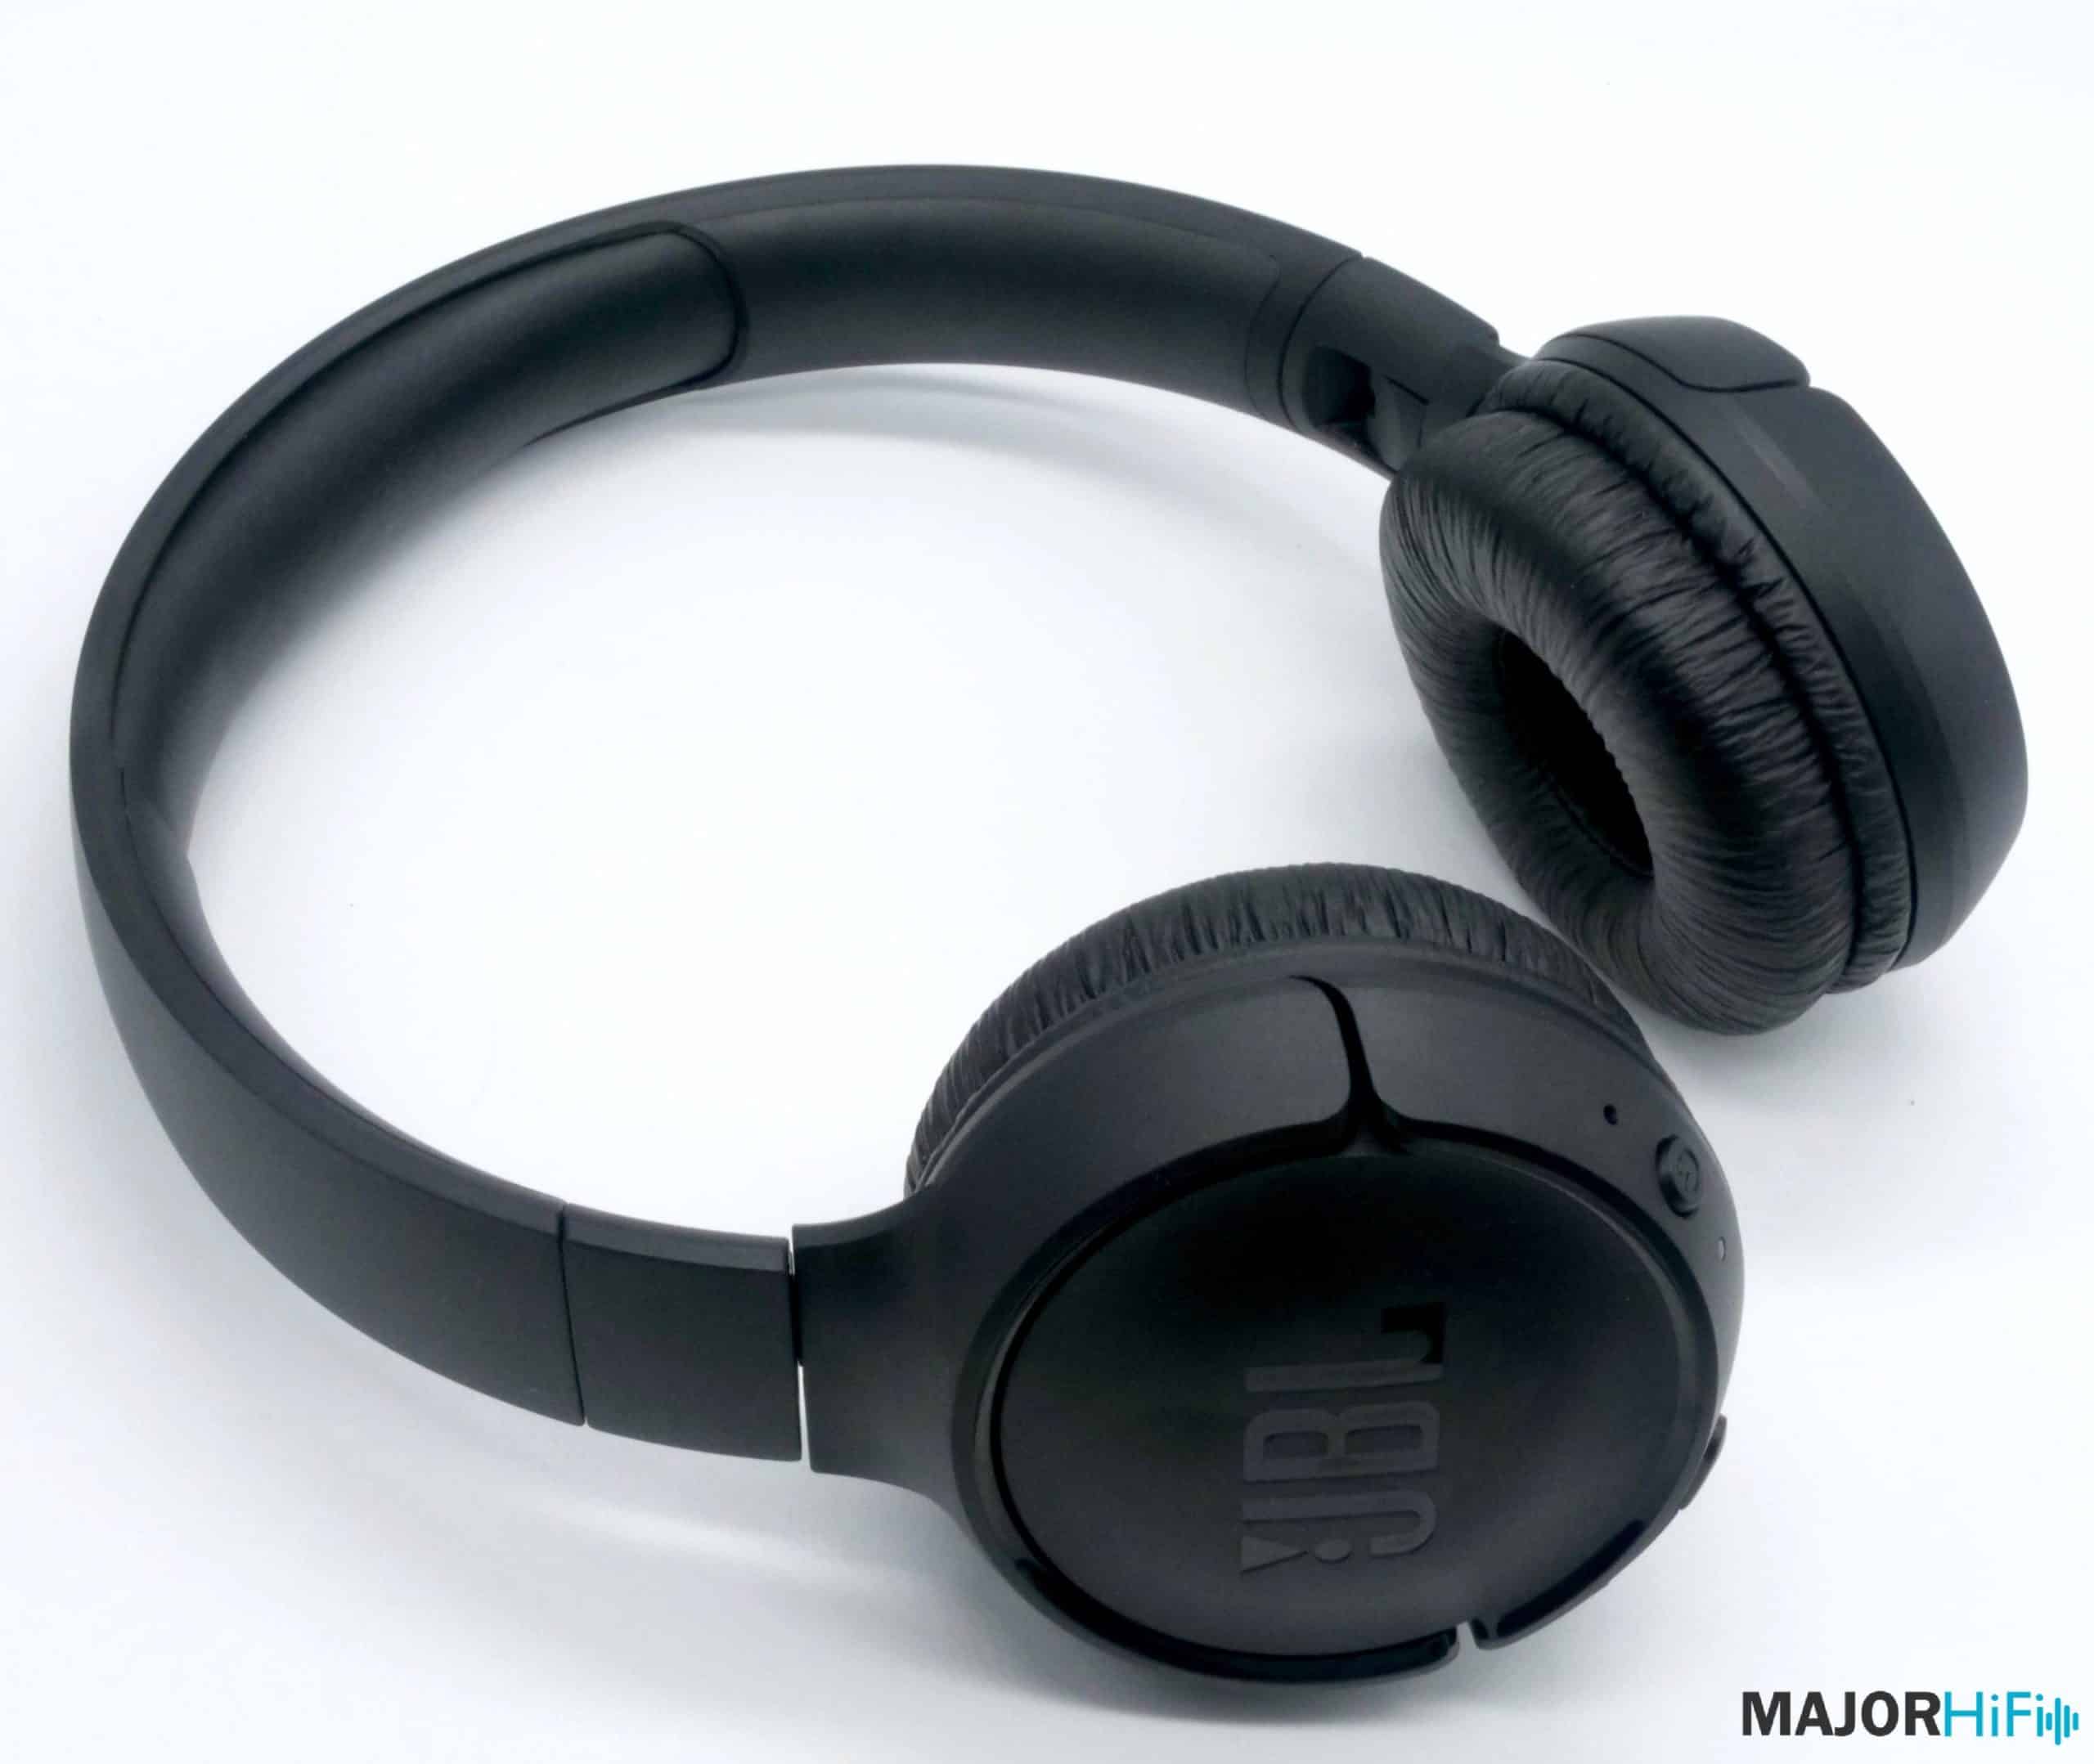 Tune 510BT Headphones - The Only Review You Need to Read HiFi